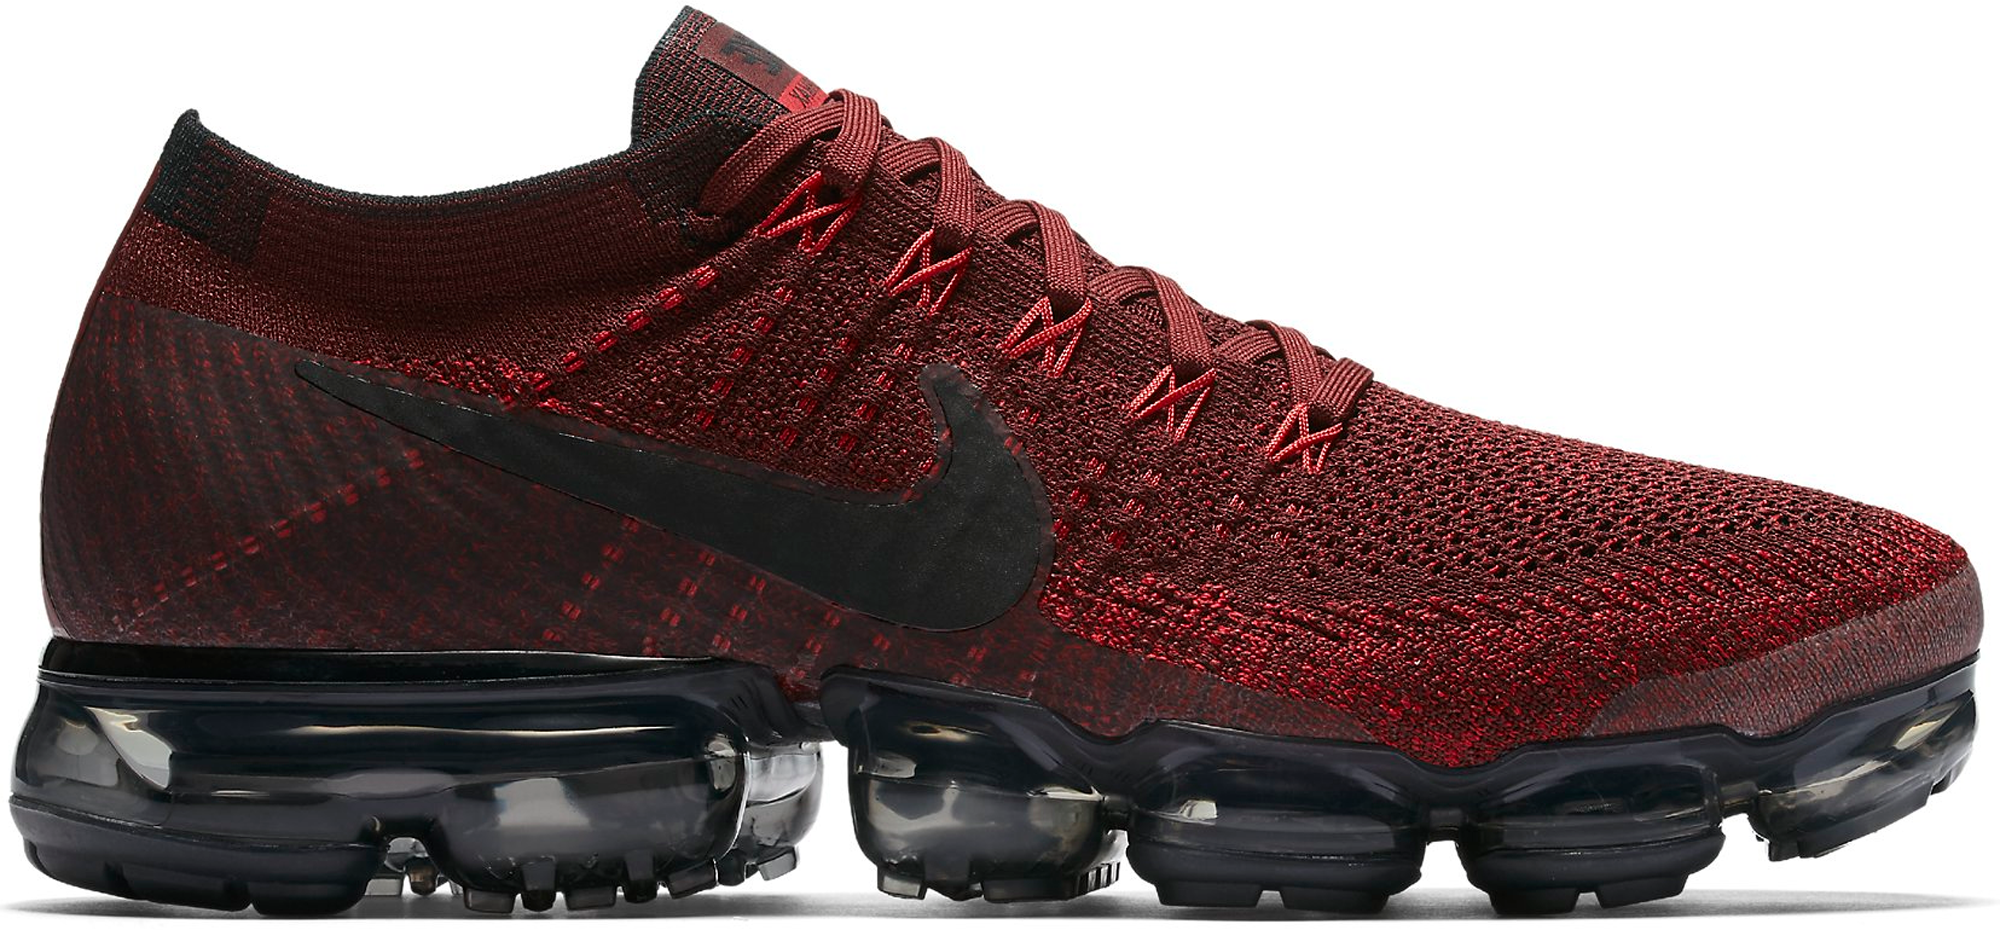 vapormax nike red and black